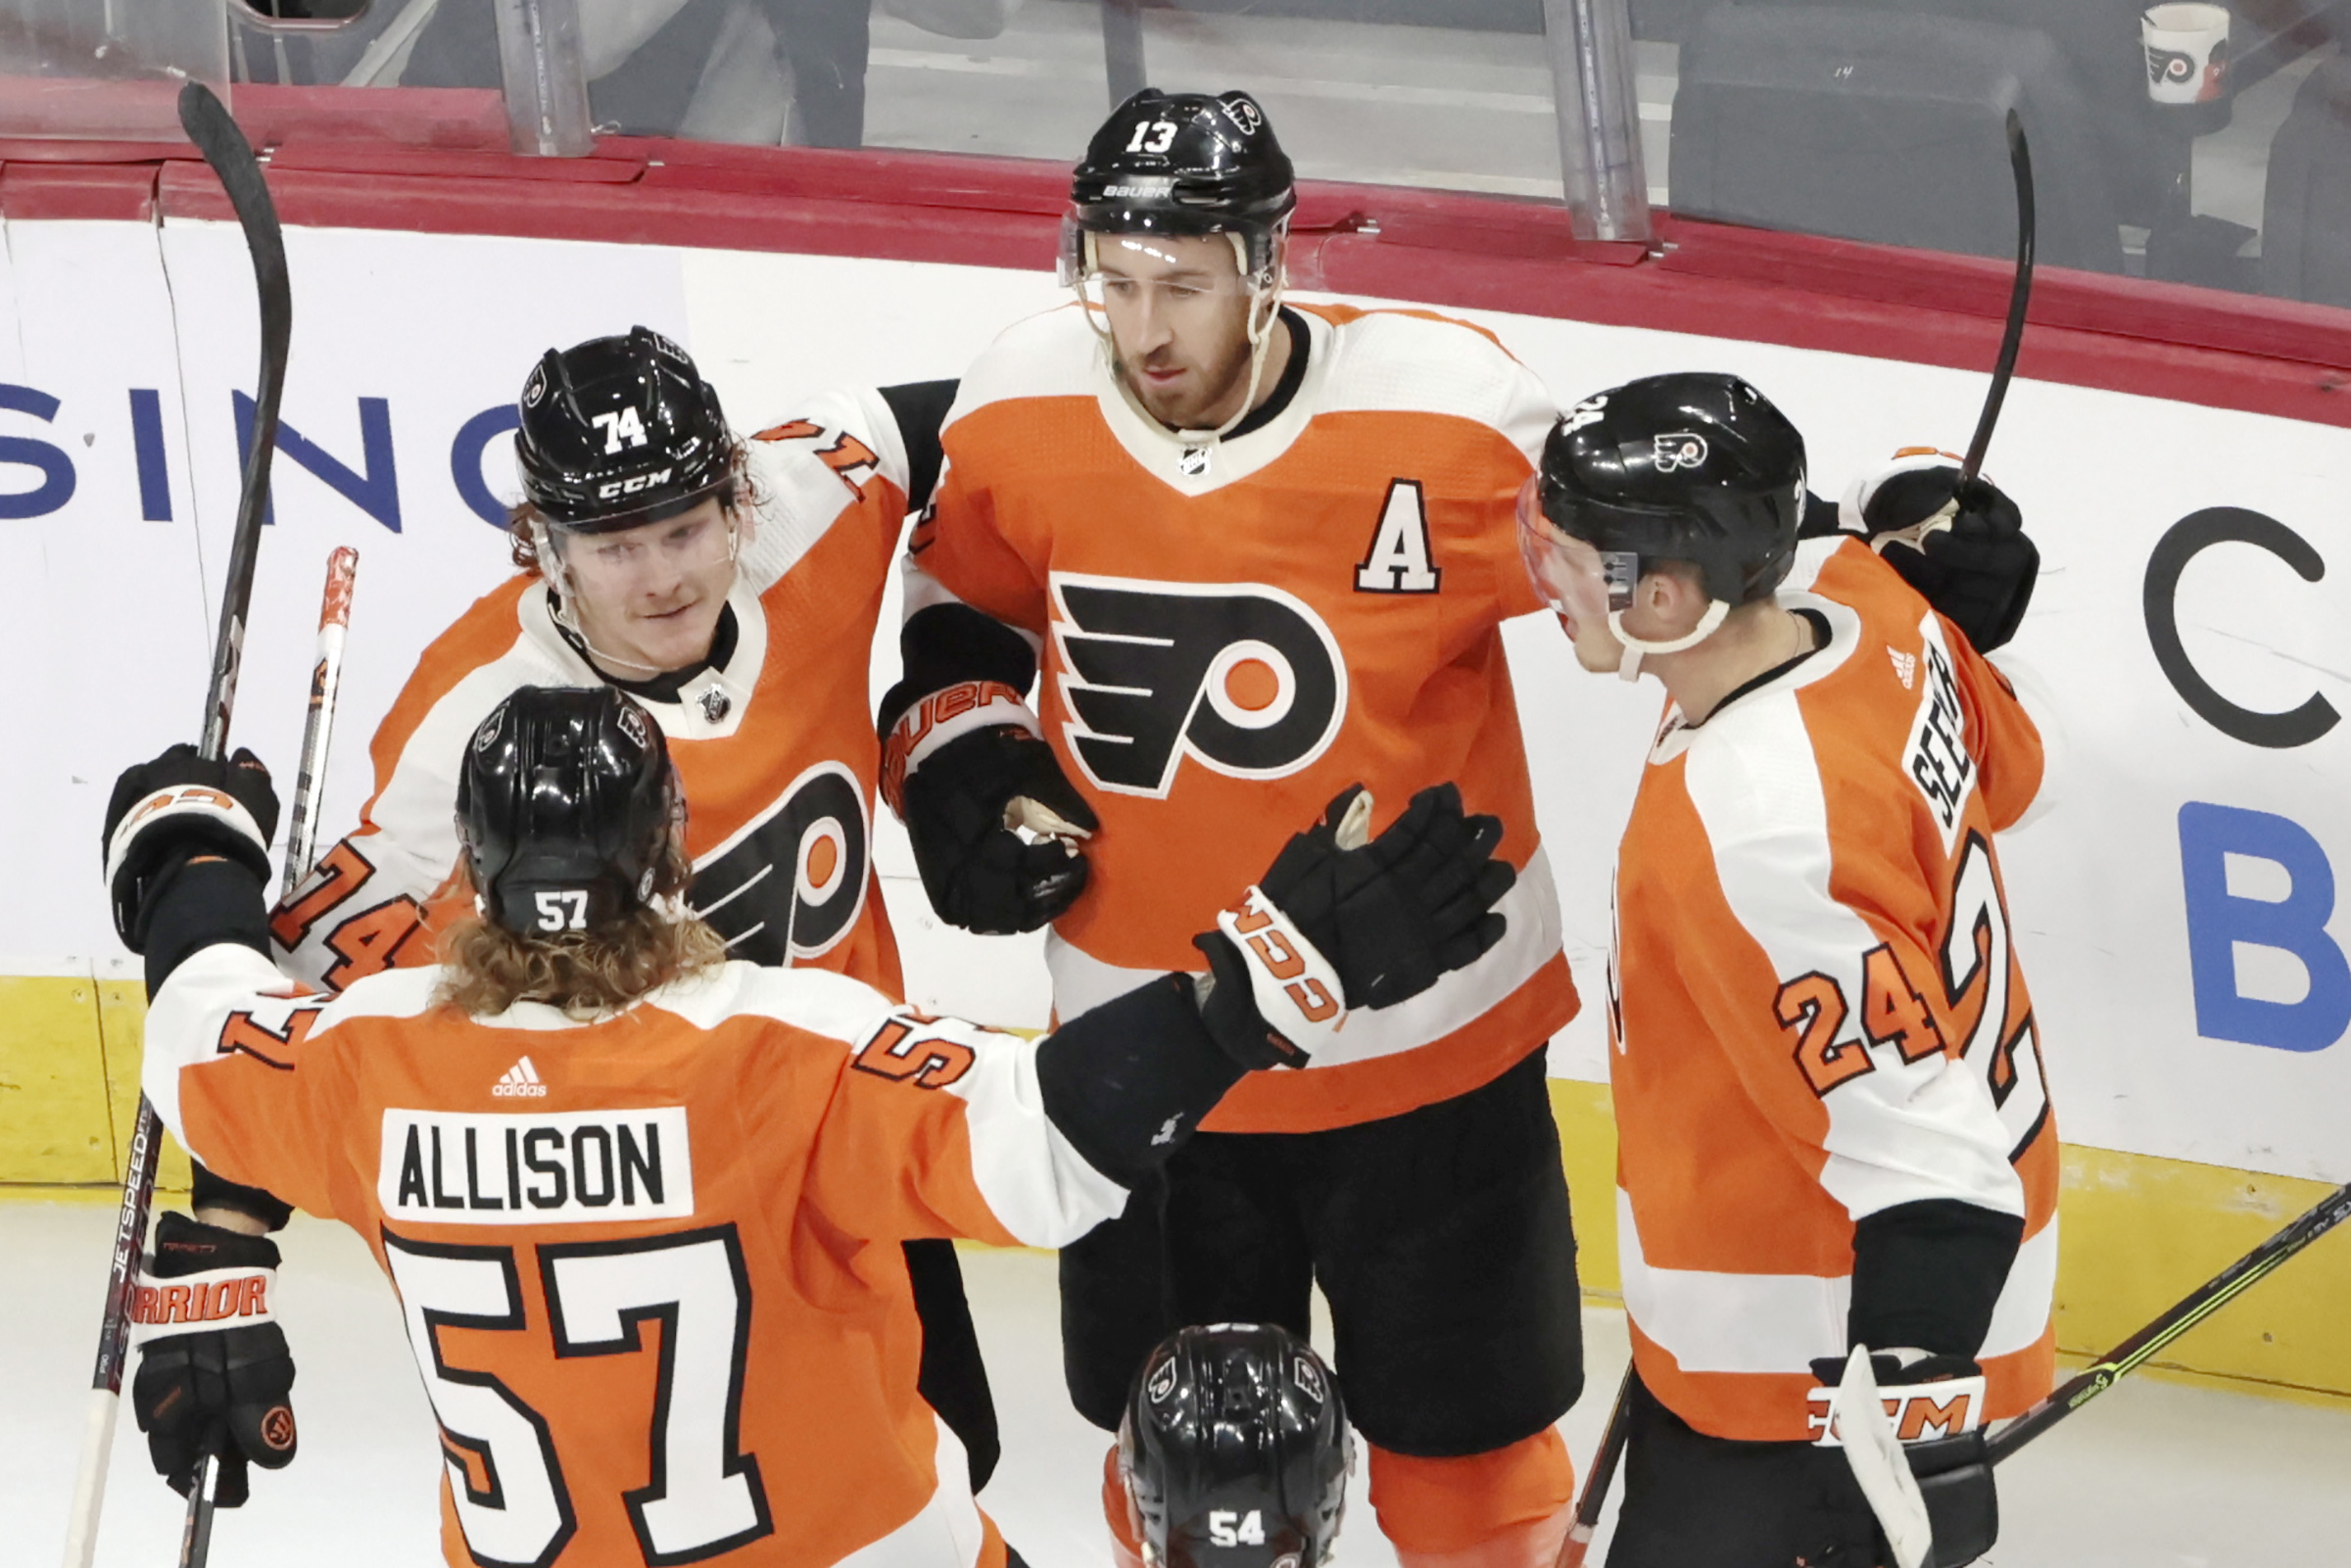 The Flyers are in drastic need of a jersey rebrand - Flyers Nation